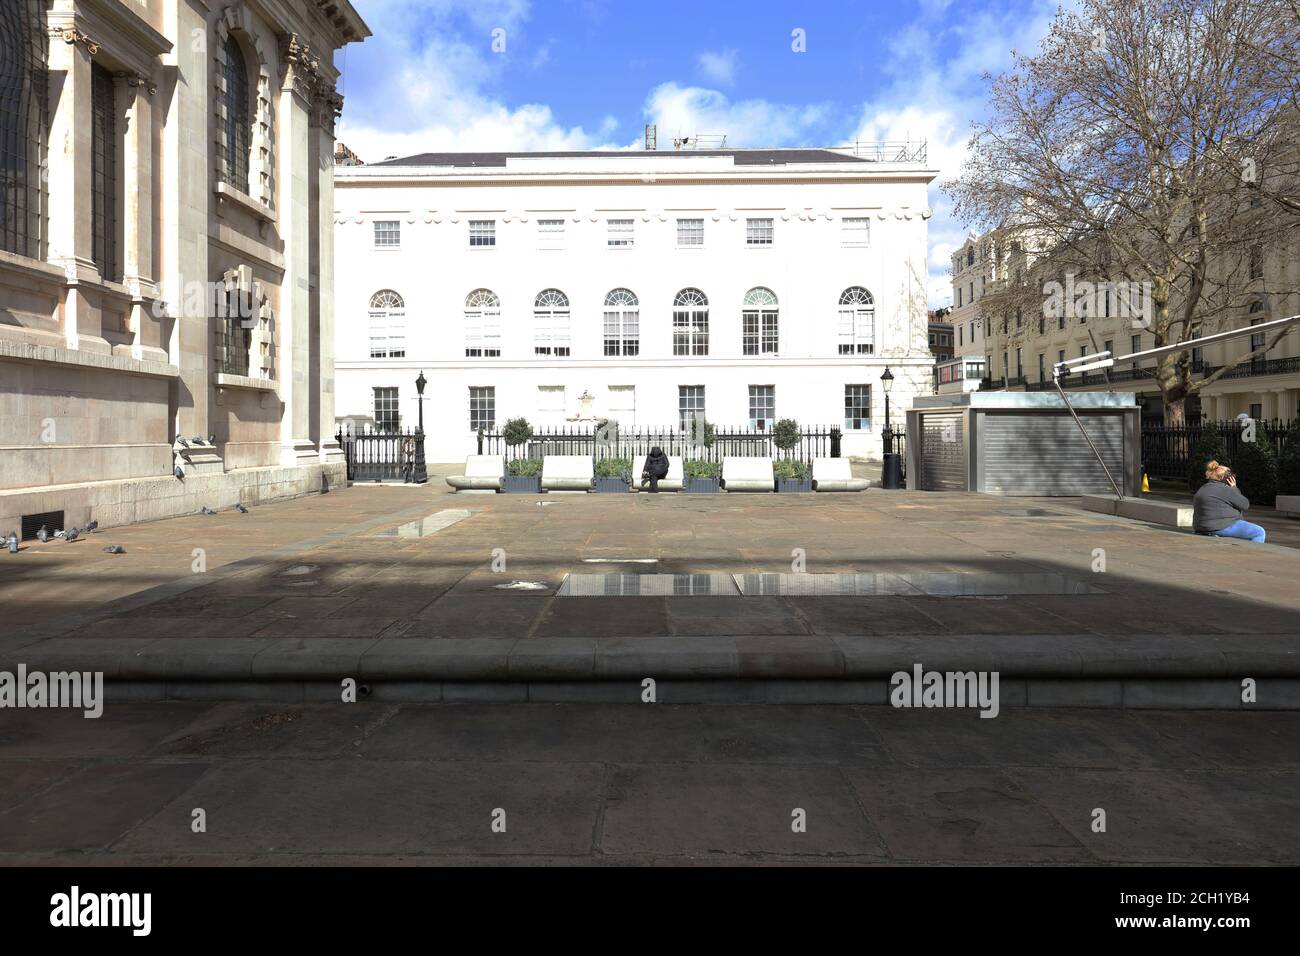 Church yard of St Martin in the Fields seen at the back of the building in central London. Stock Photo